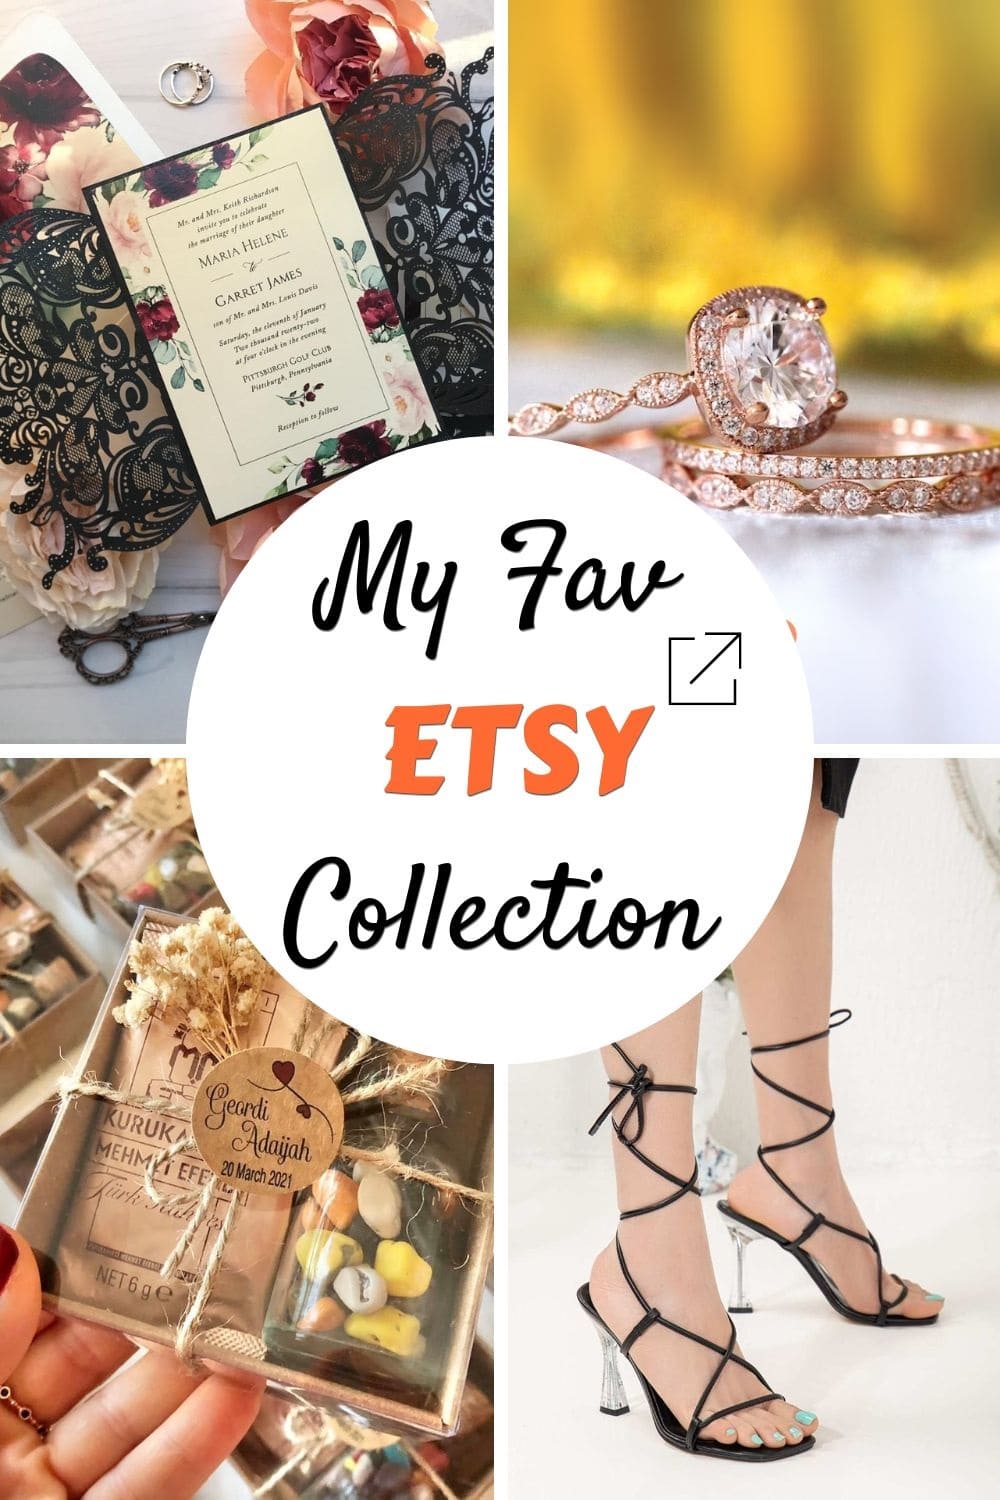 Discover my favorite ETSY collection!